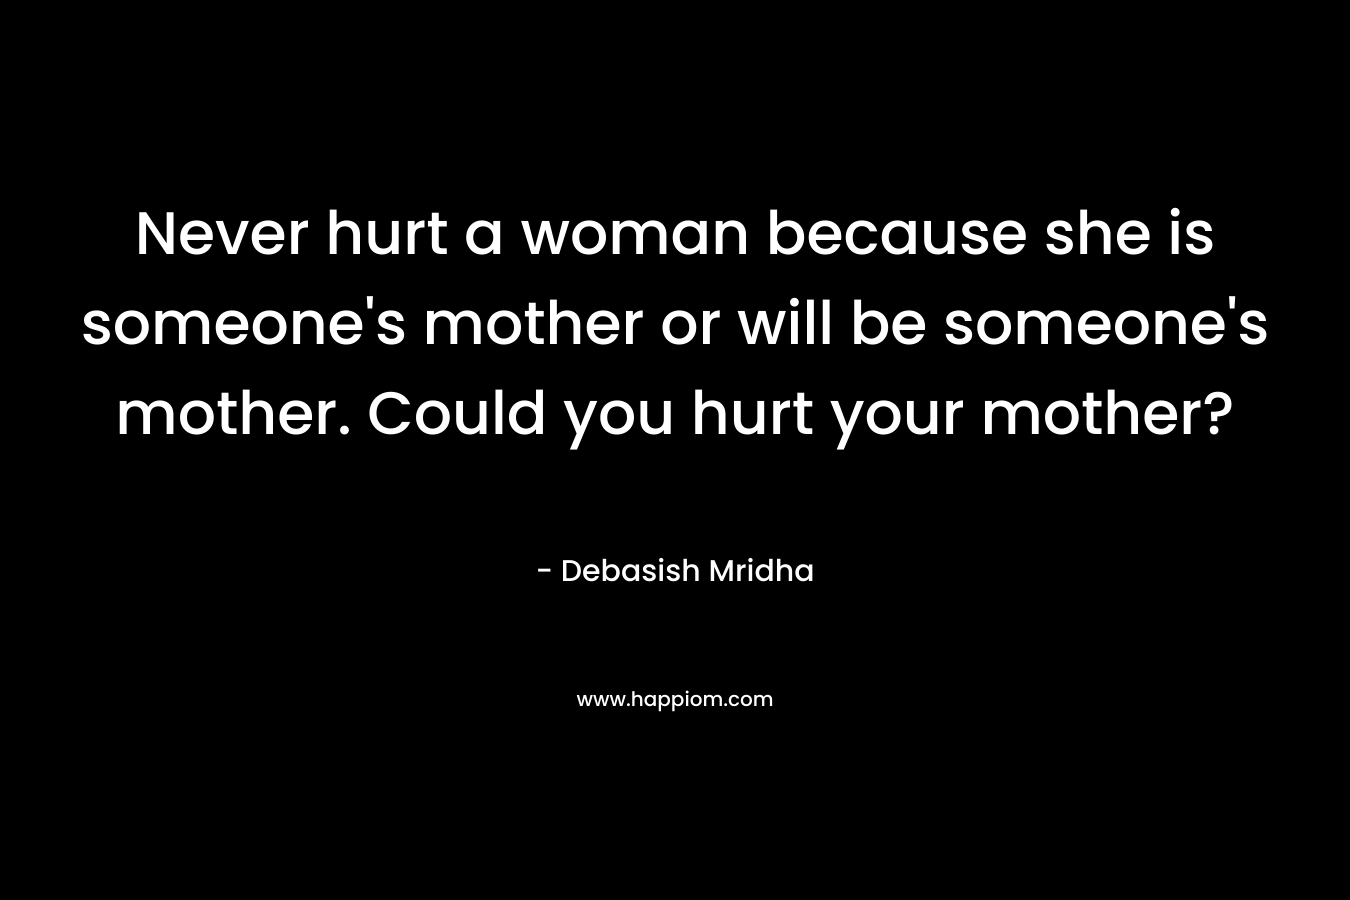 Never hurt a woman because she is someone's mother or will be someone's mother. Could you hurt your mother?